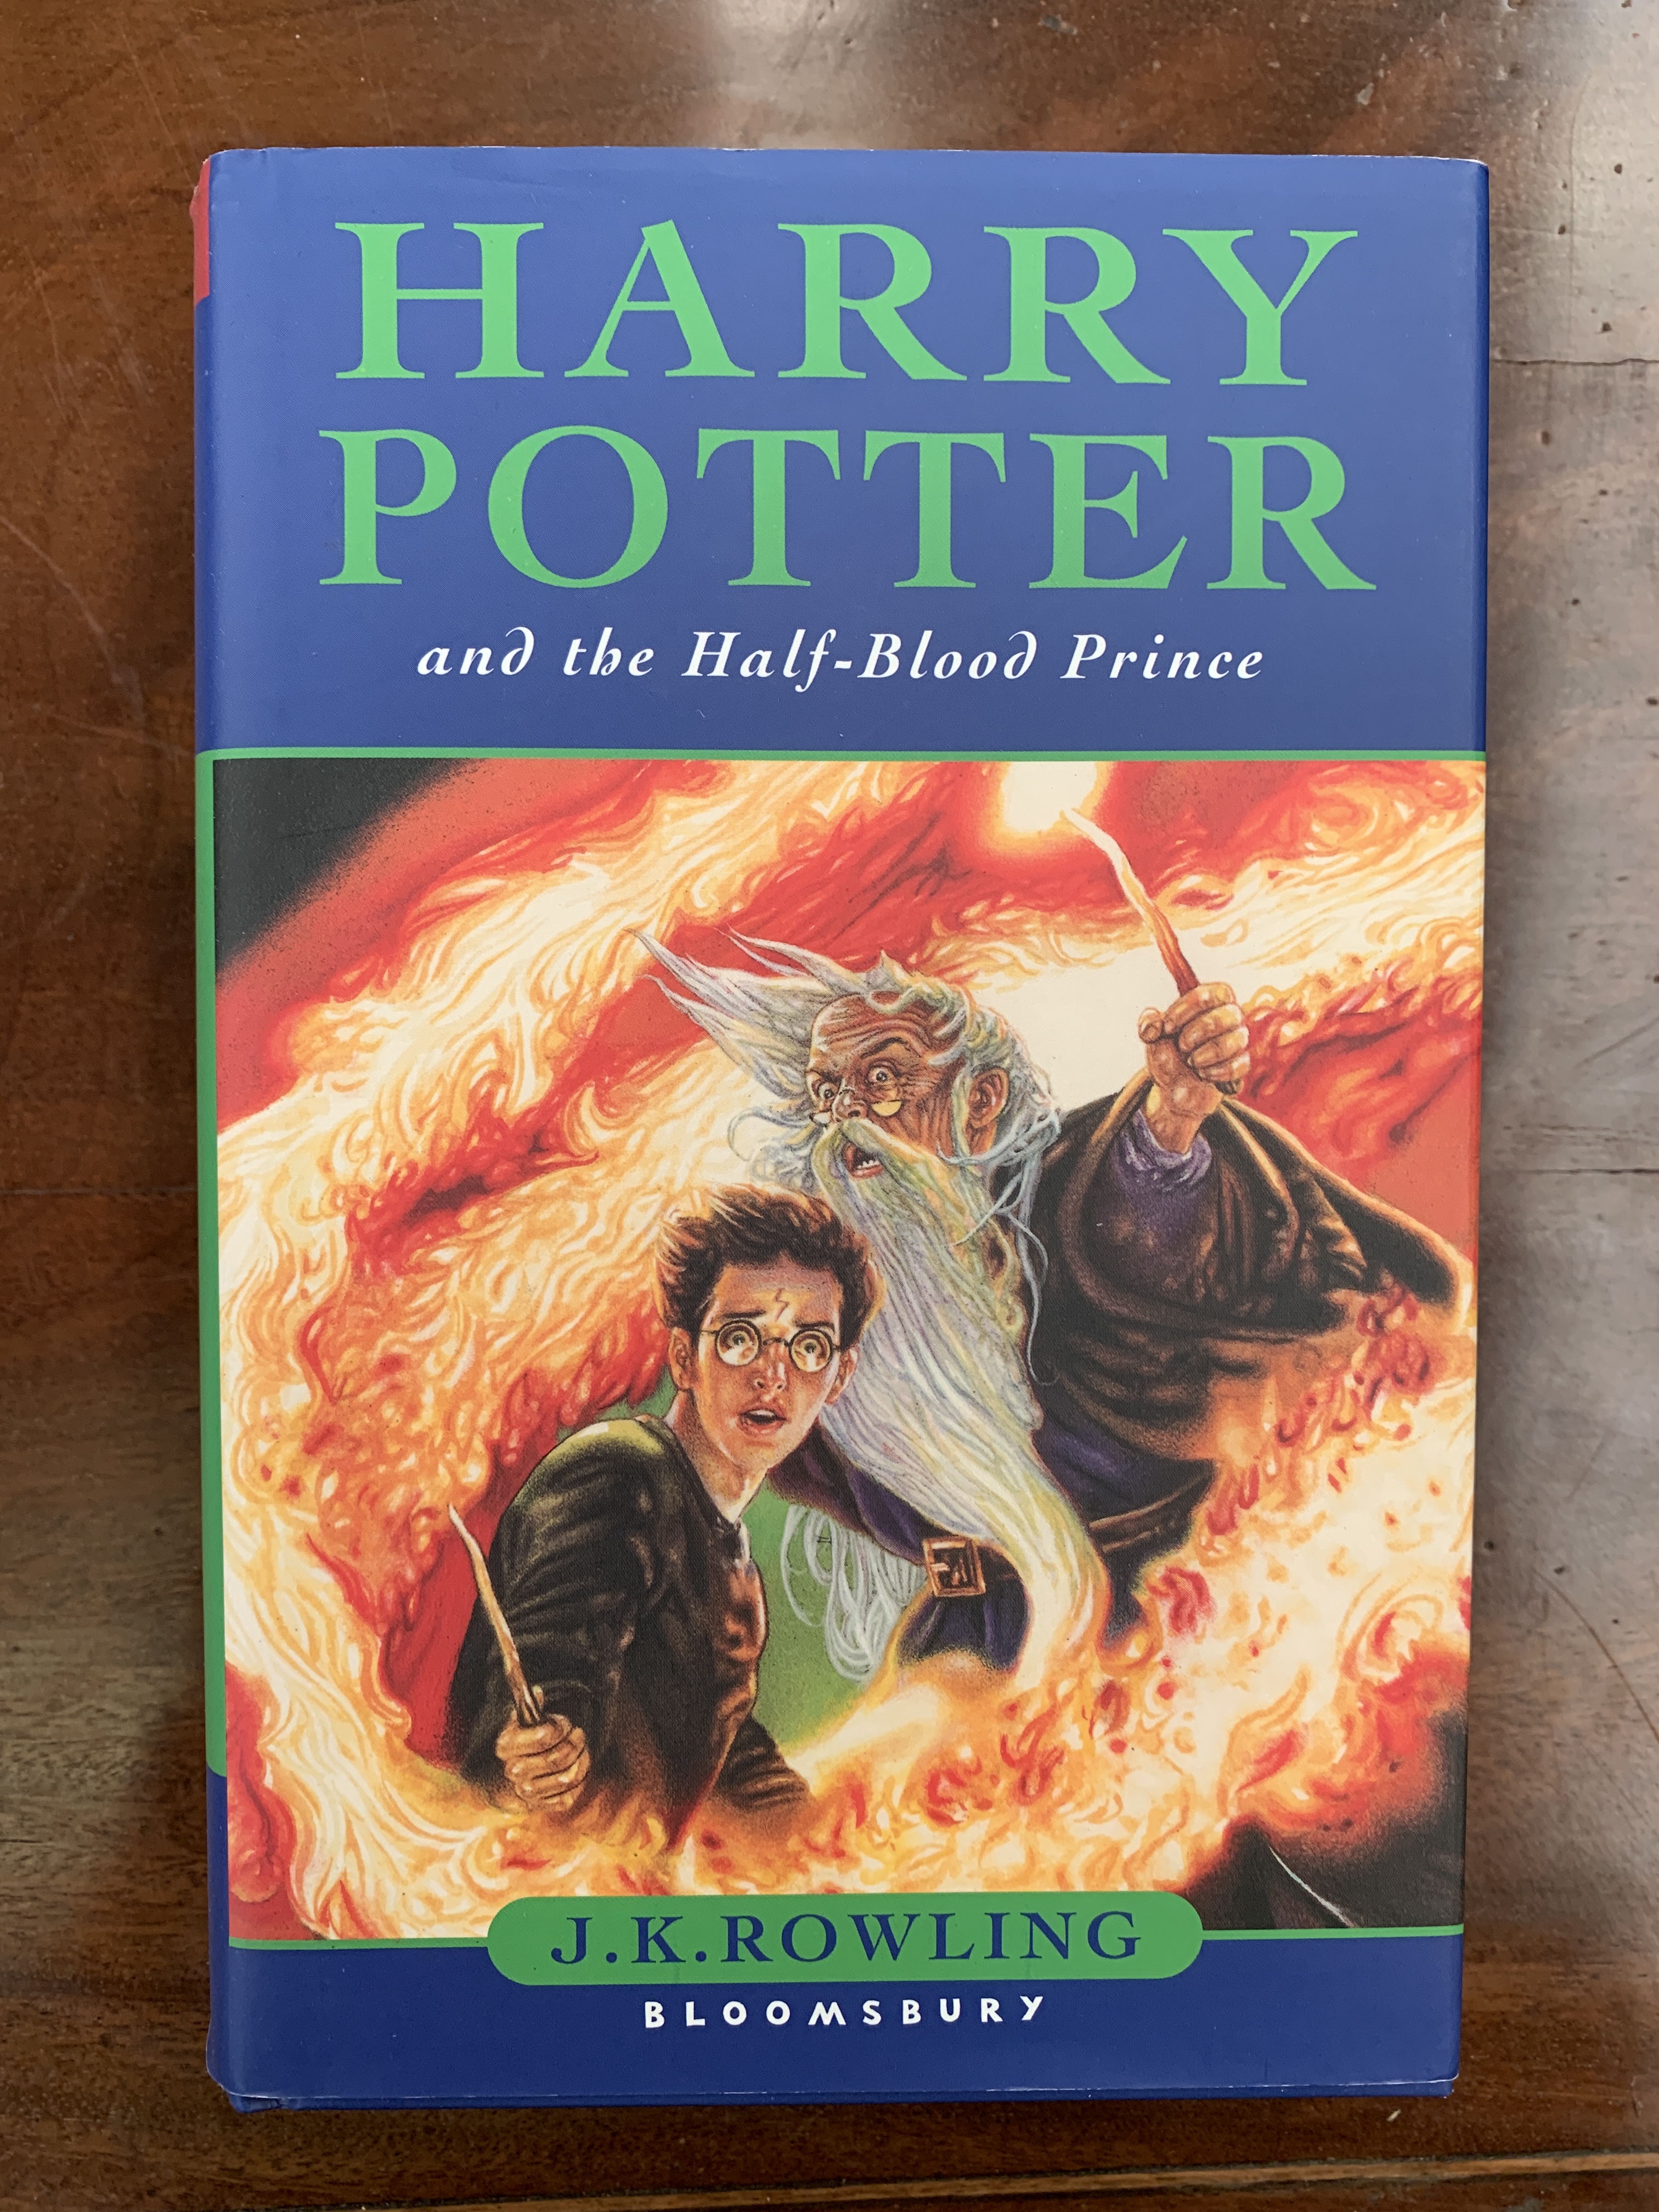 Harry Potter and The Half-Blood Prince hardback first edition